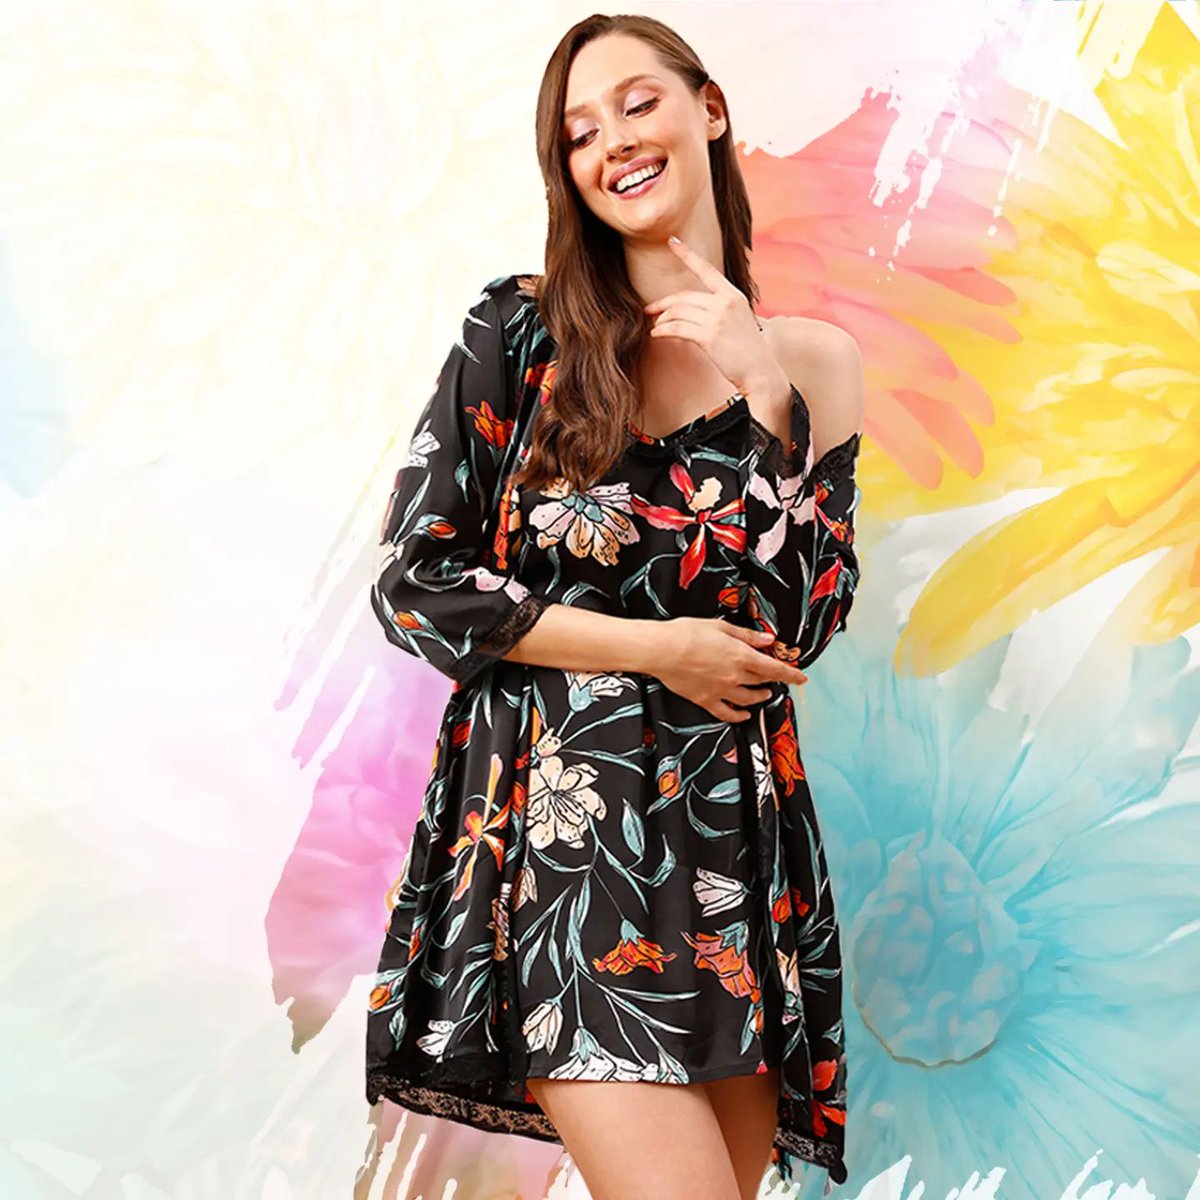 🌺Flower power meets stylish sleepy vibes with this dreamy satin nighty & robe set! ✨

Product Featured: NS1497P13

Shop now at clovia.com!

#floraldress #robeset #flowerpower #satindress #nightyandrobe #fashion #ootd #outfitinspo #explore #clovia